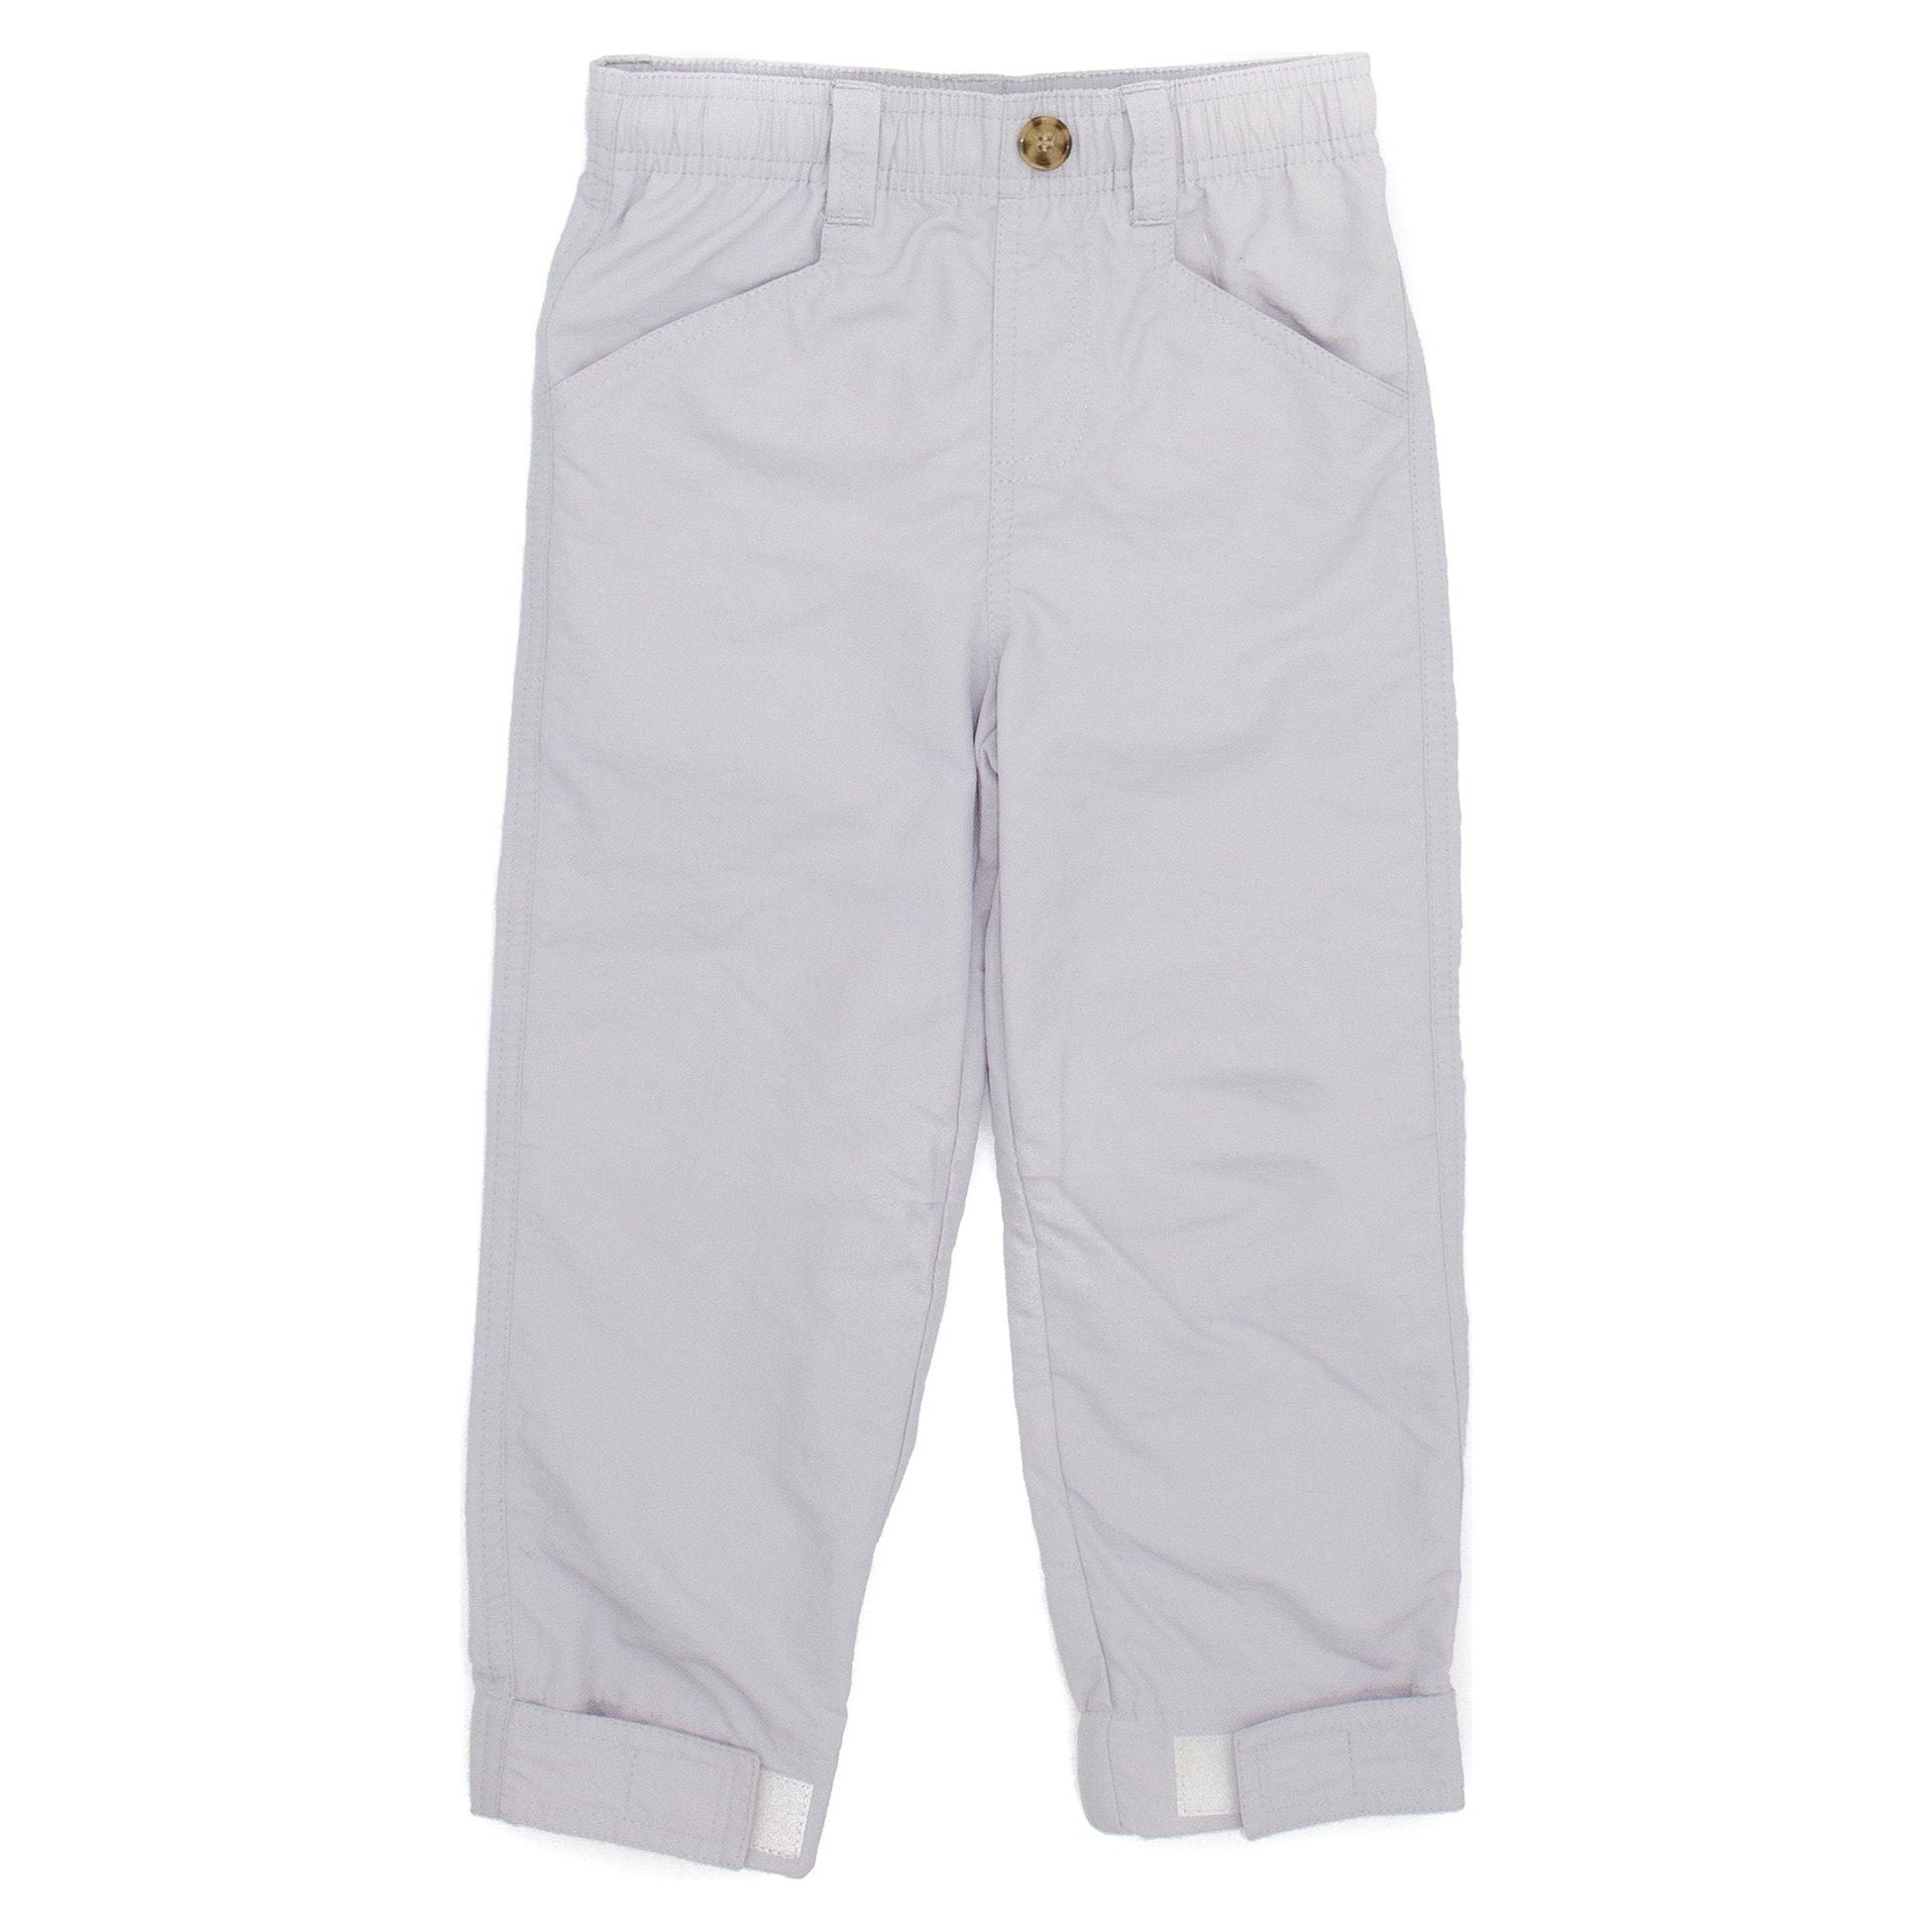 light grey lightweight pants with drawstring waist and velcro at the ankles